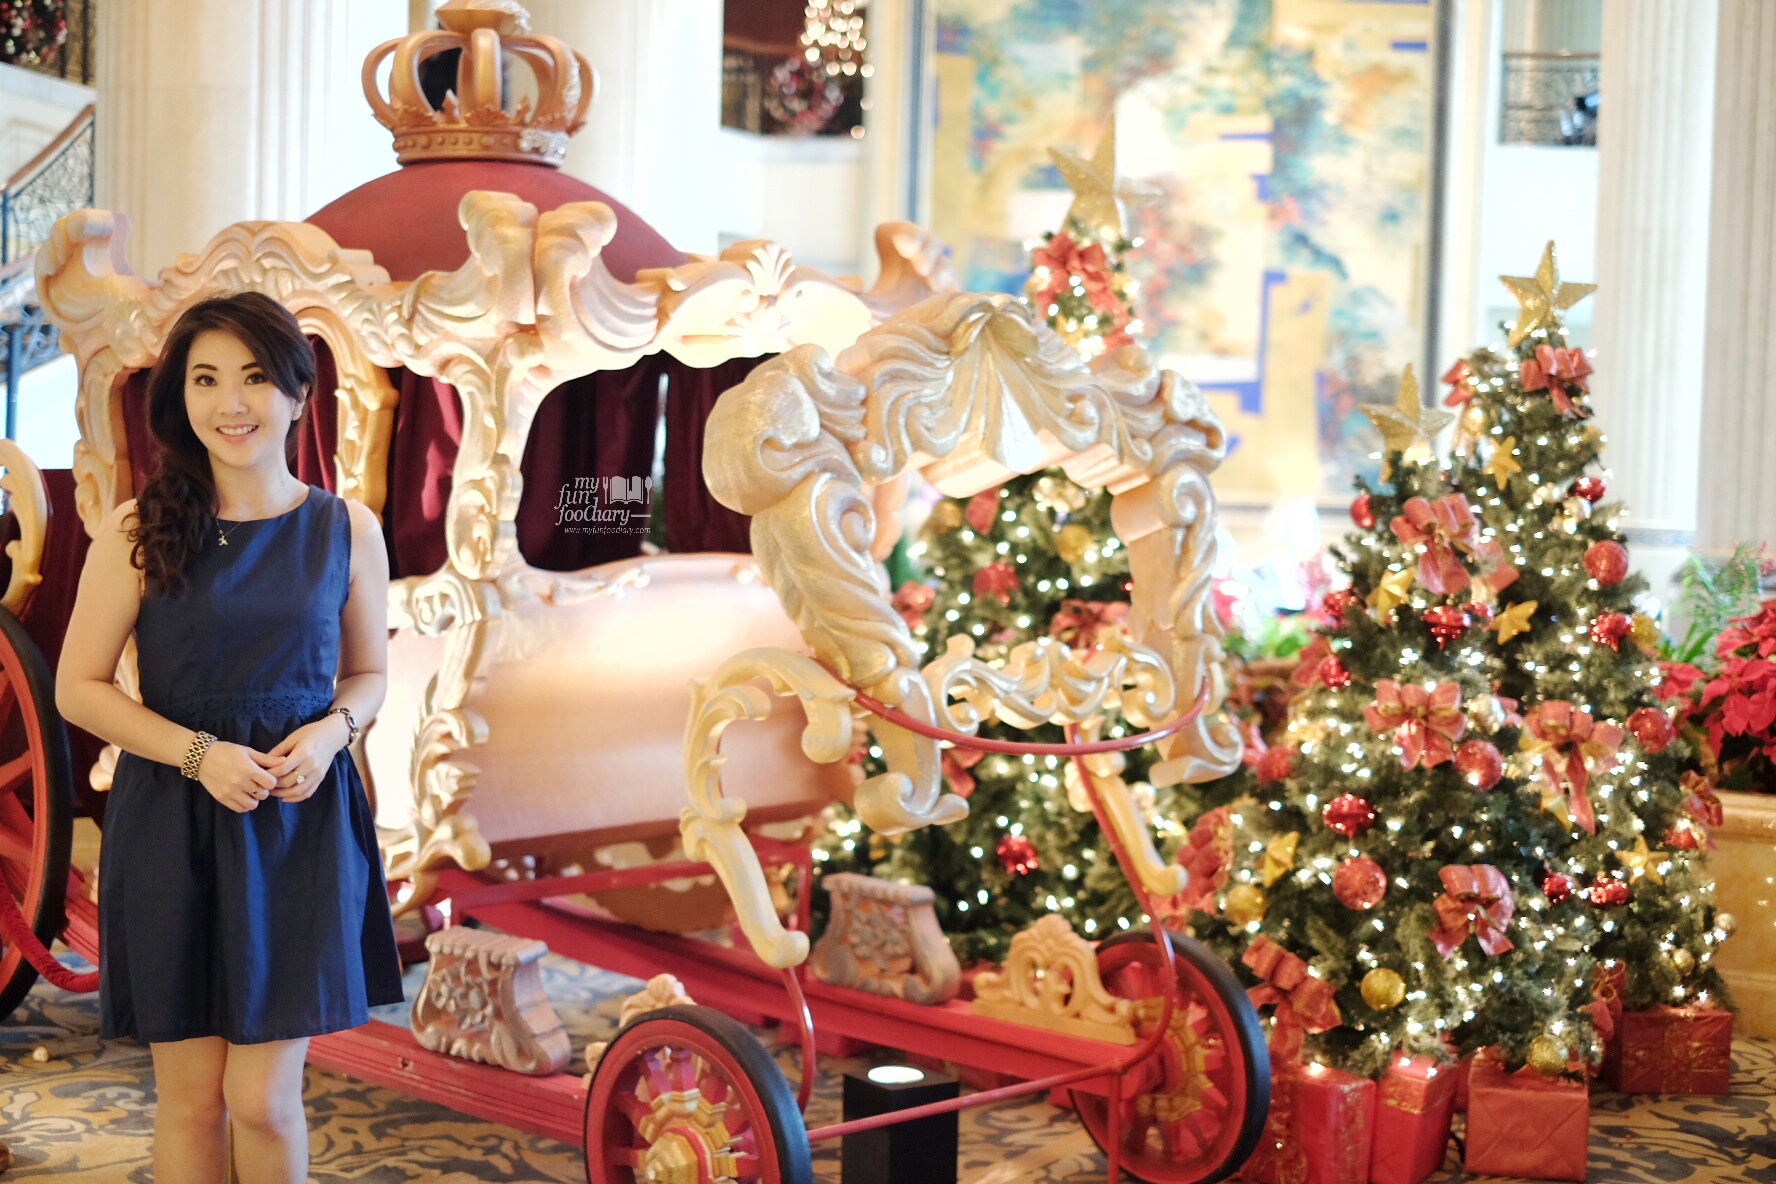 Mullie with beautiful Sleigh Ride at Tower Wing Shangri-La Singapore by Myfunfoodiary